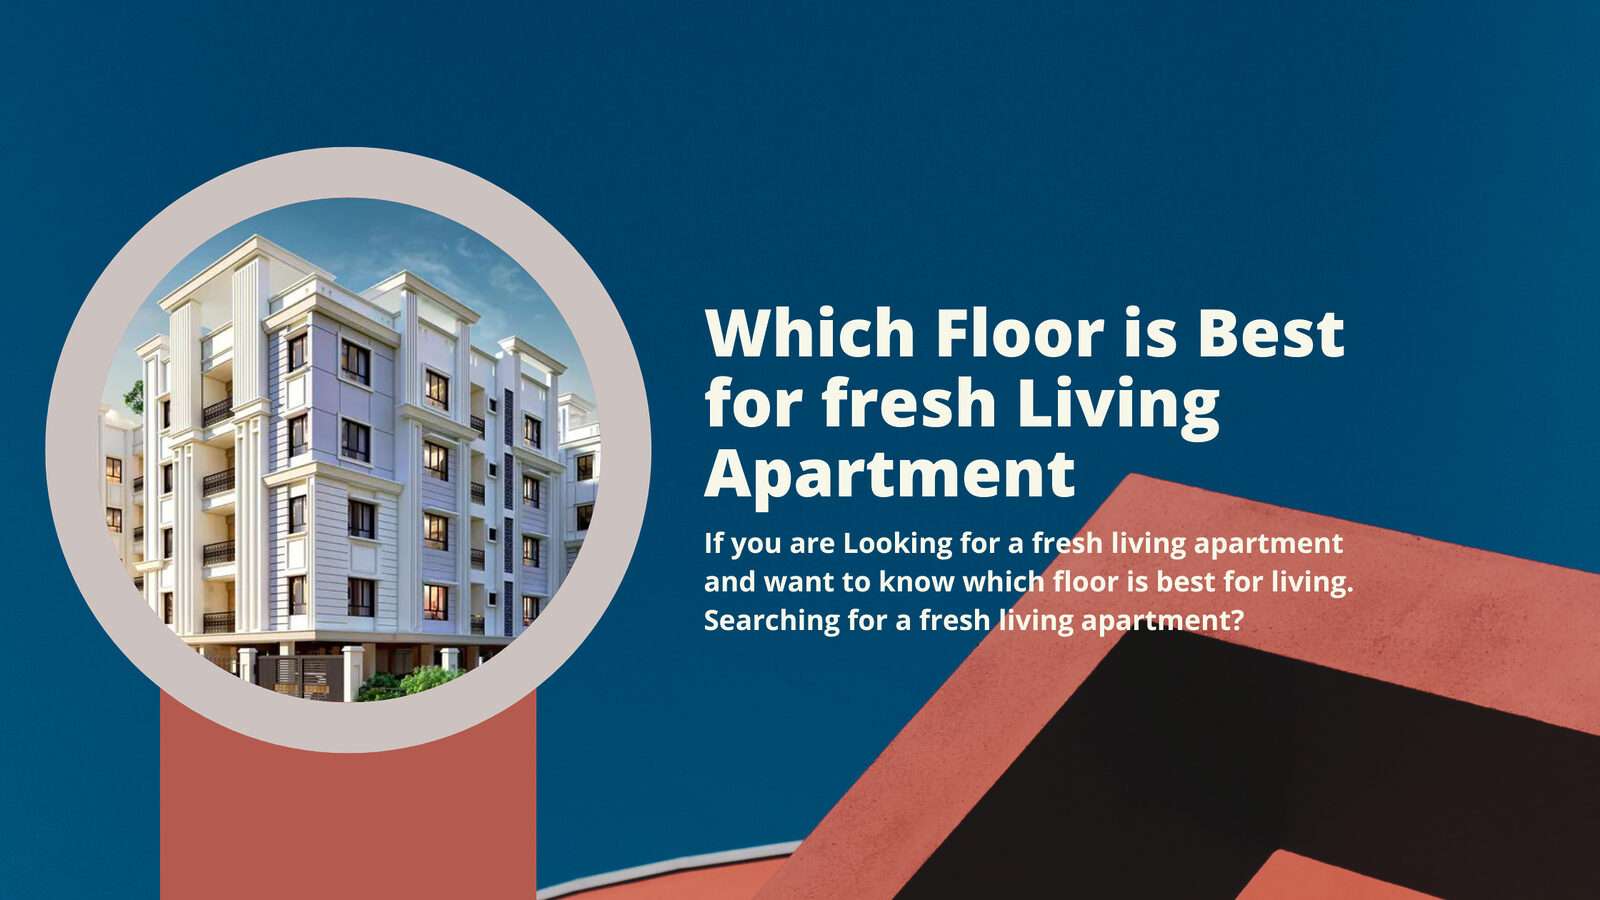 Which Floor is Best for fresh living apartment